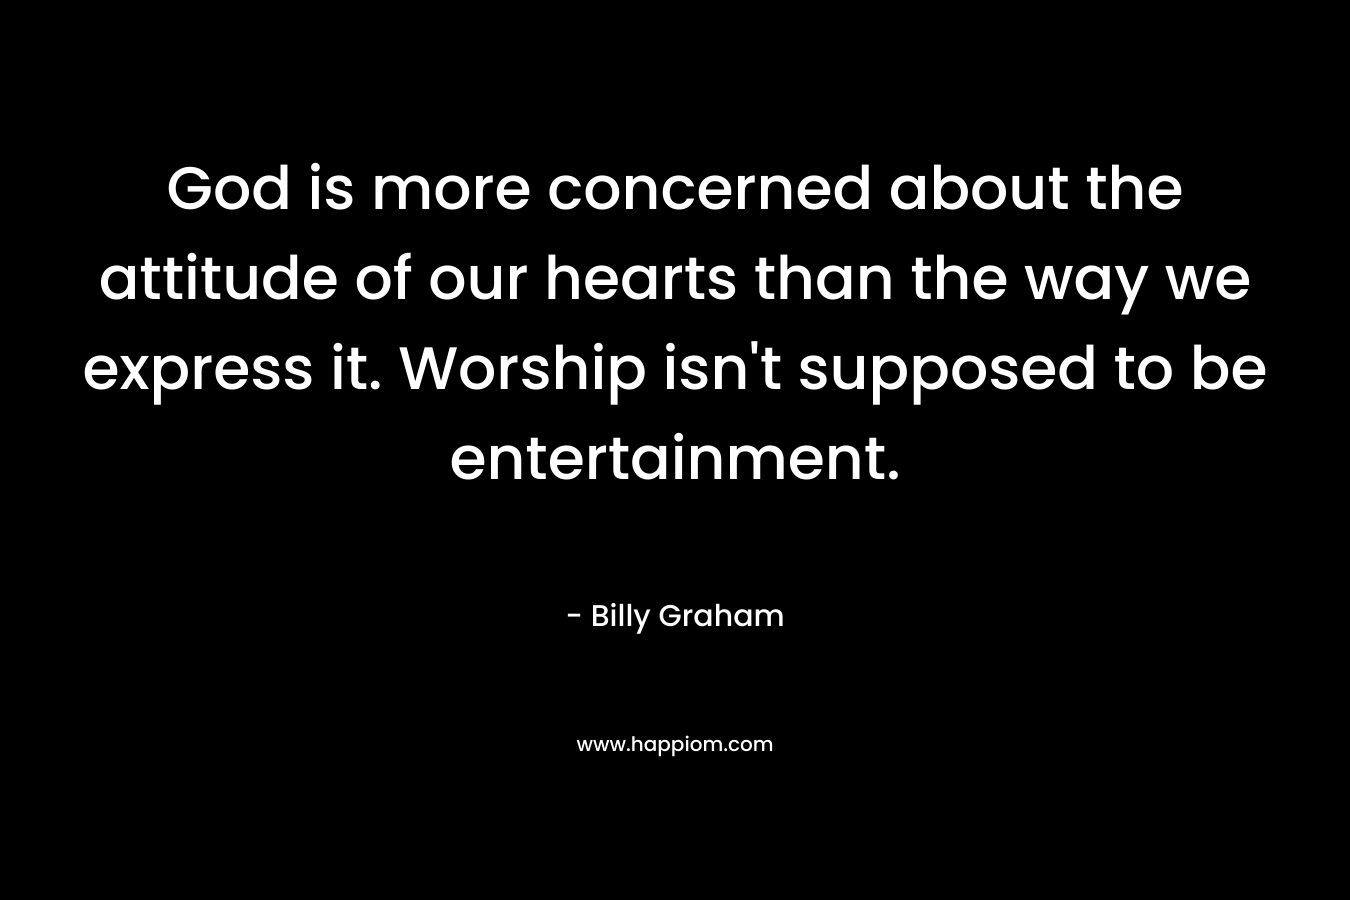 God is more concerned about the attitude of our hearts than the way we express it. Worship isn't supposed to be entertainment.